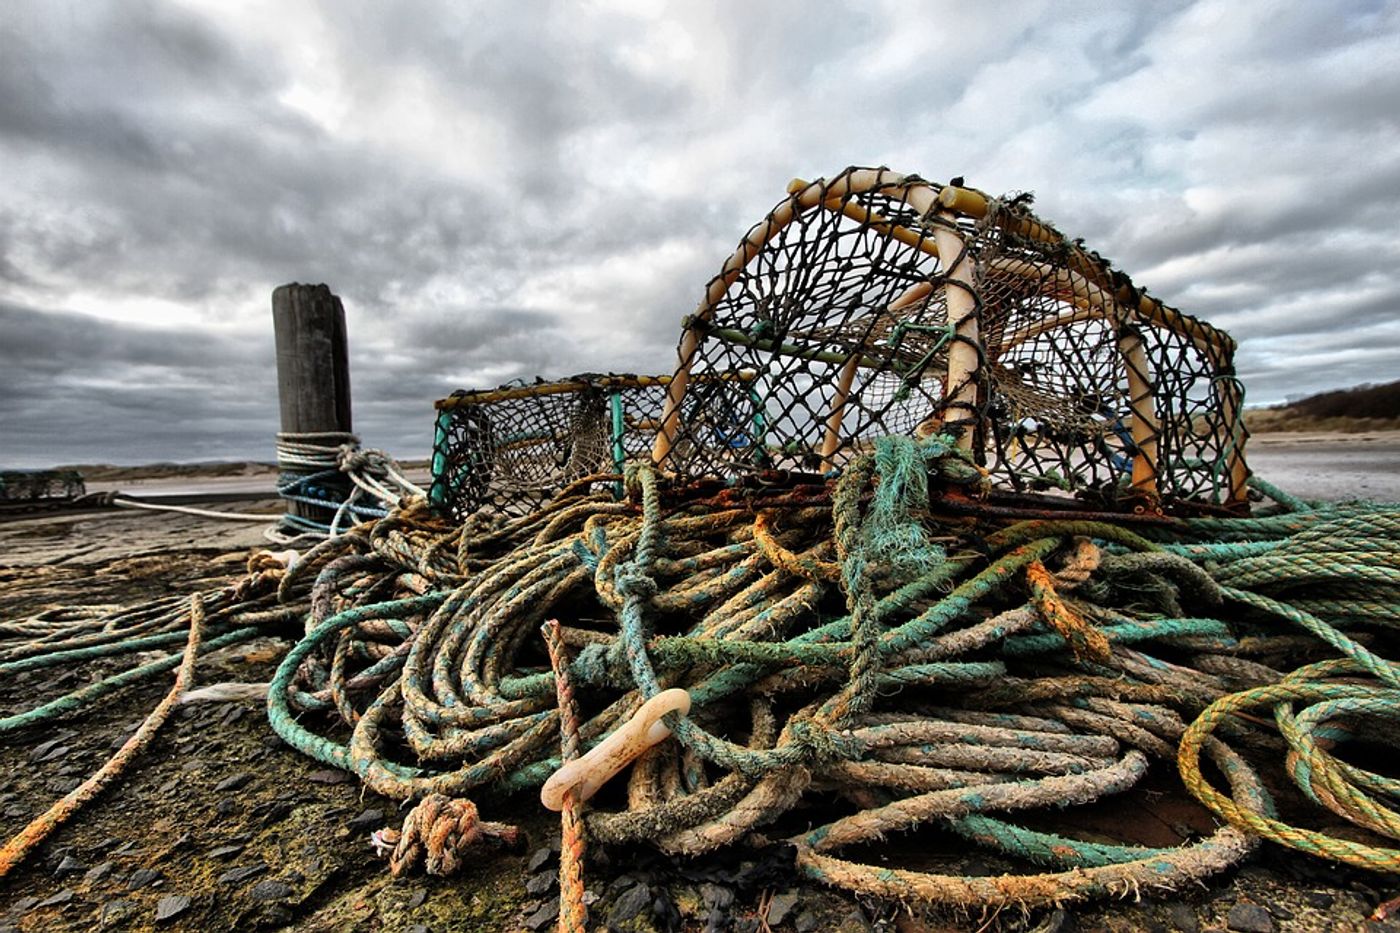 The lobster fishery in the Gulf of Maine is a billion dollar industry. Photo: Pixabay